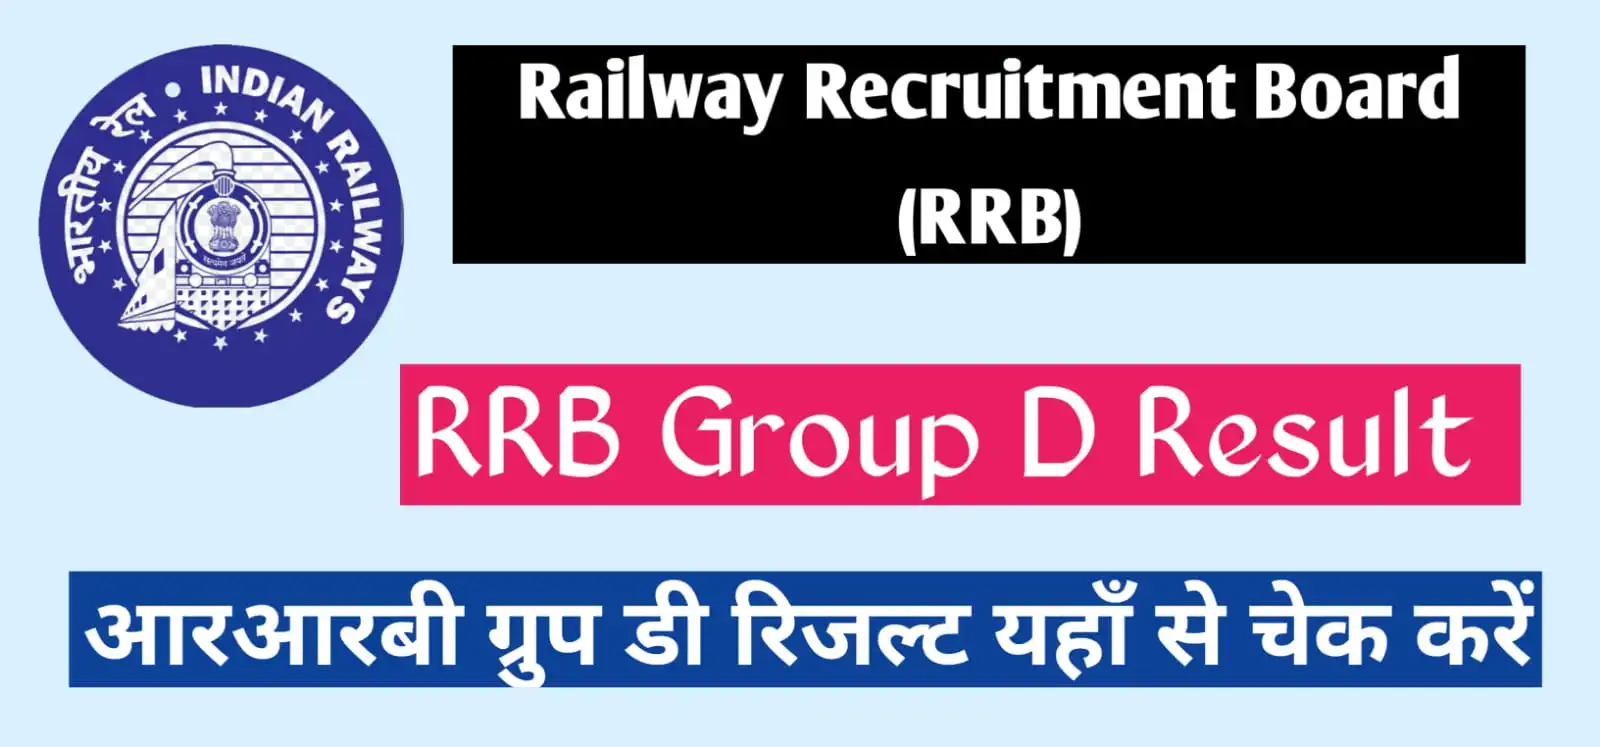 RRB Bangalore Group D Result